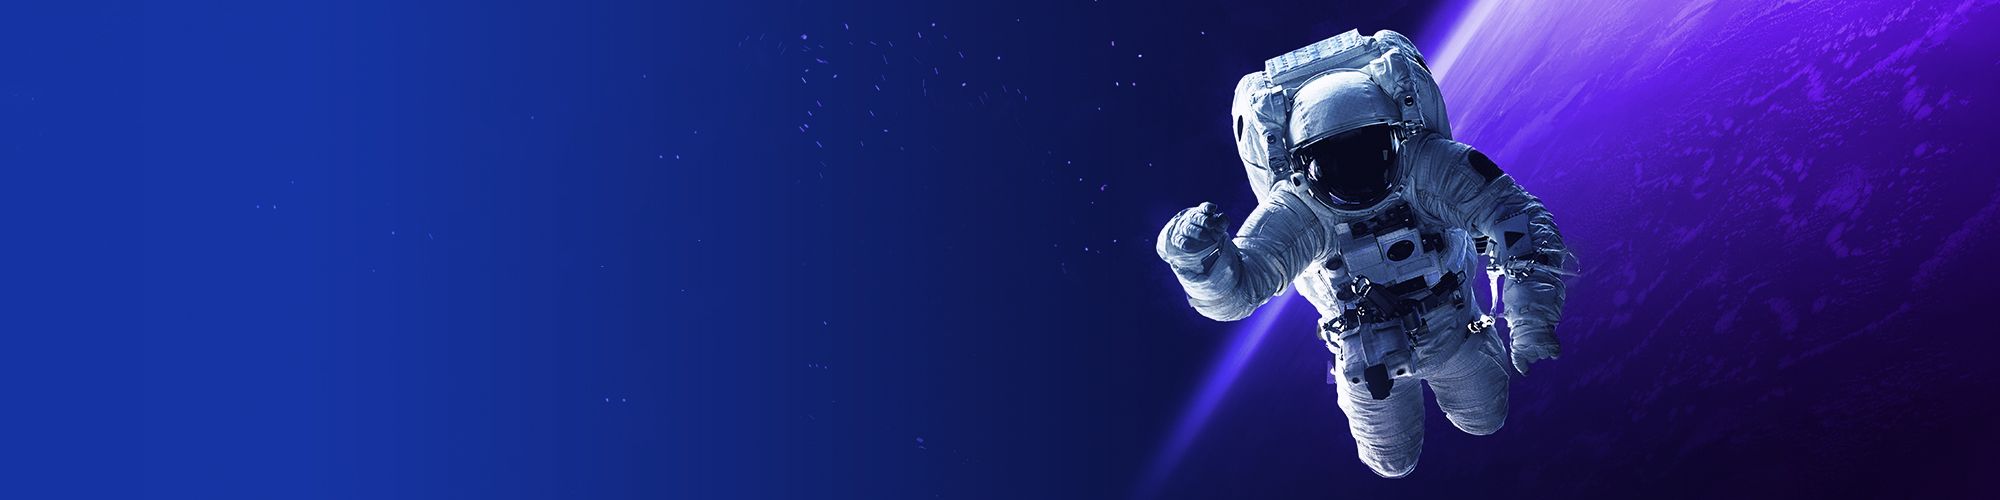 shot-of-astronaut-in-outer-space-banner